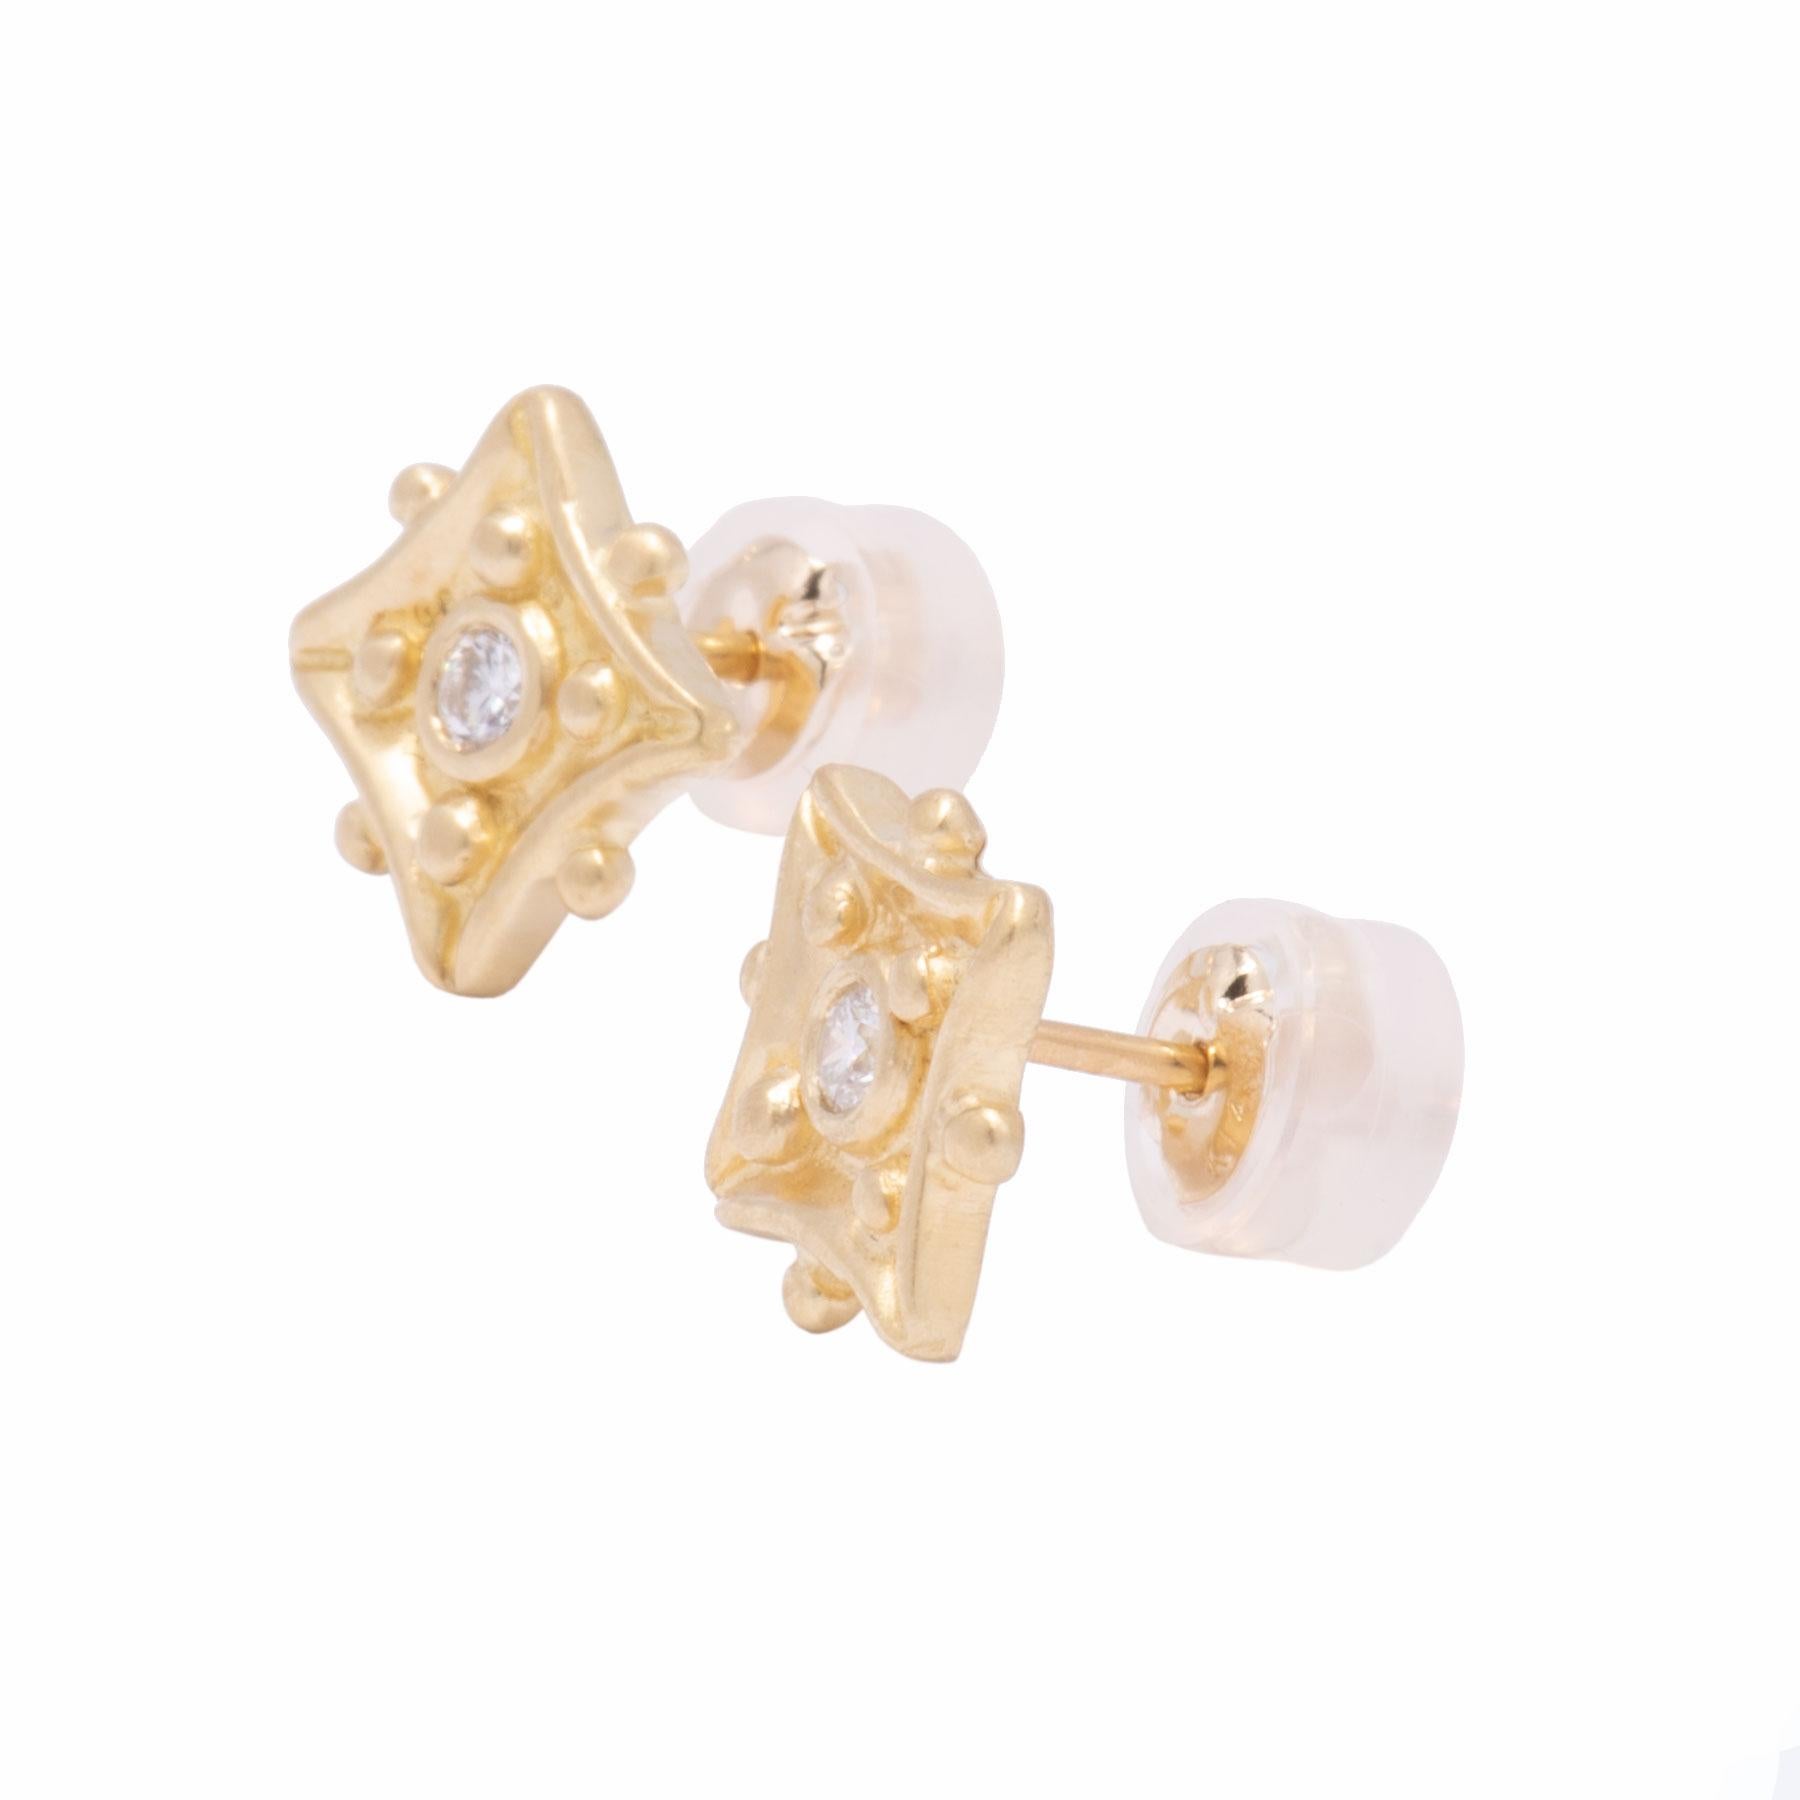 The perfect earrings for everyday wear, our Kite Stud Earrings are crafted in our studio in 18 karat gold and set with .10 tcw white diamonds. Gold beading between the points and at cardinal points around the round bright white diamonds accent the